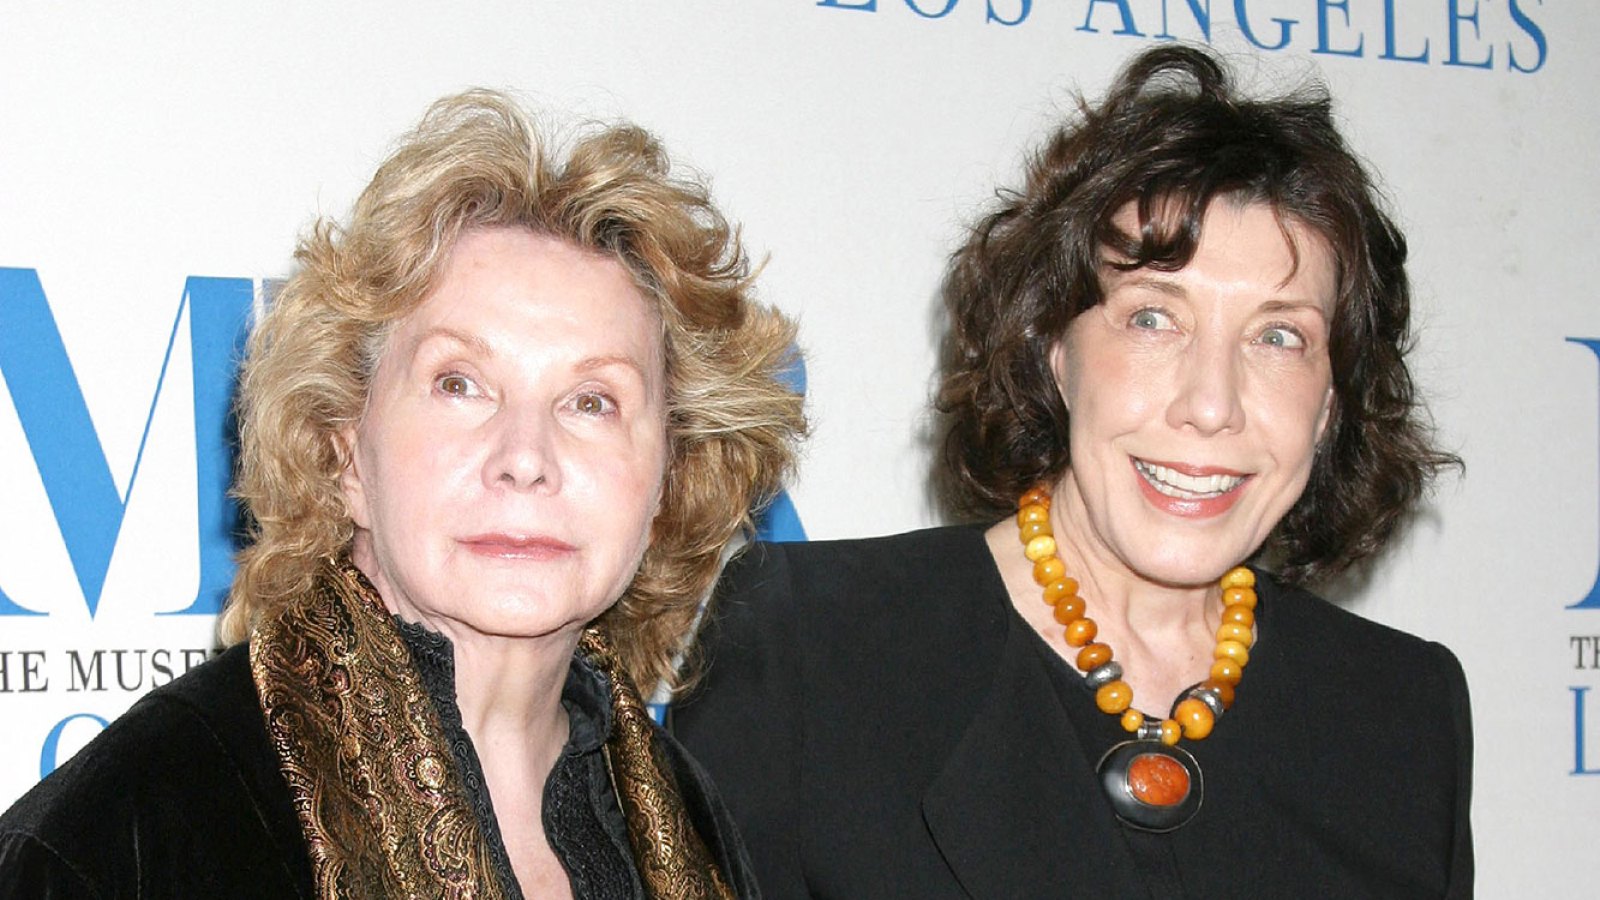 Lily Tomlin Marries Girlfriend Jane Wagner After 42 Years Together: “They Are Very Happy,” Rep Says